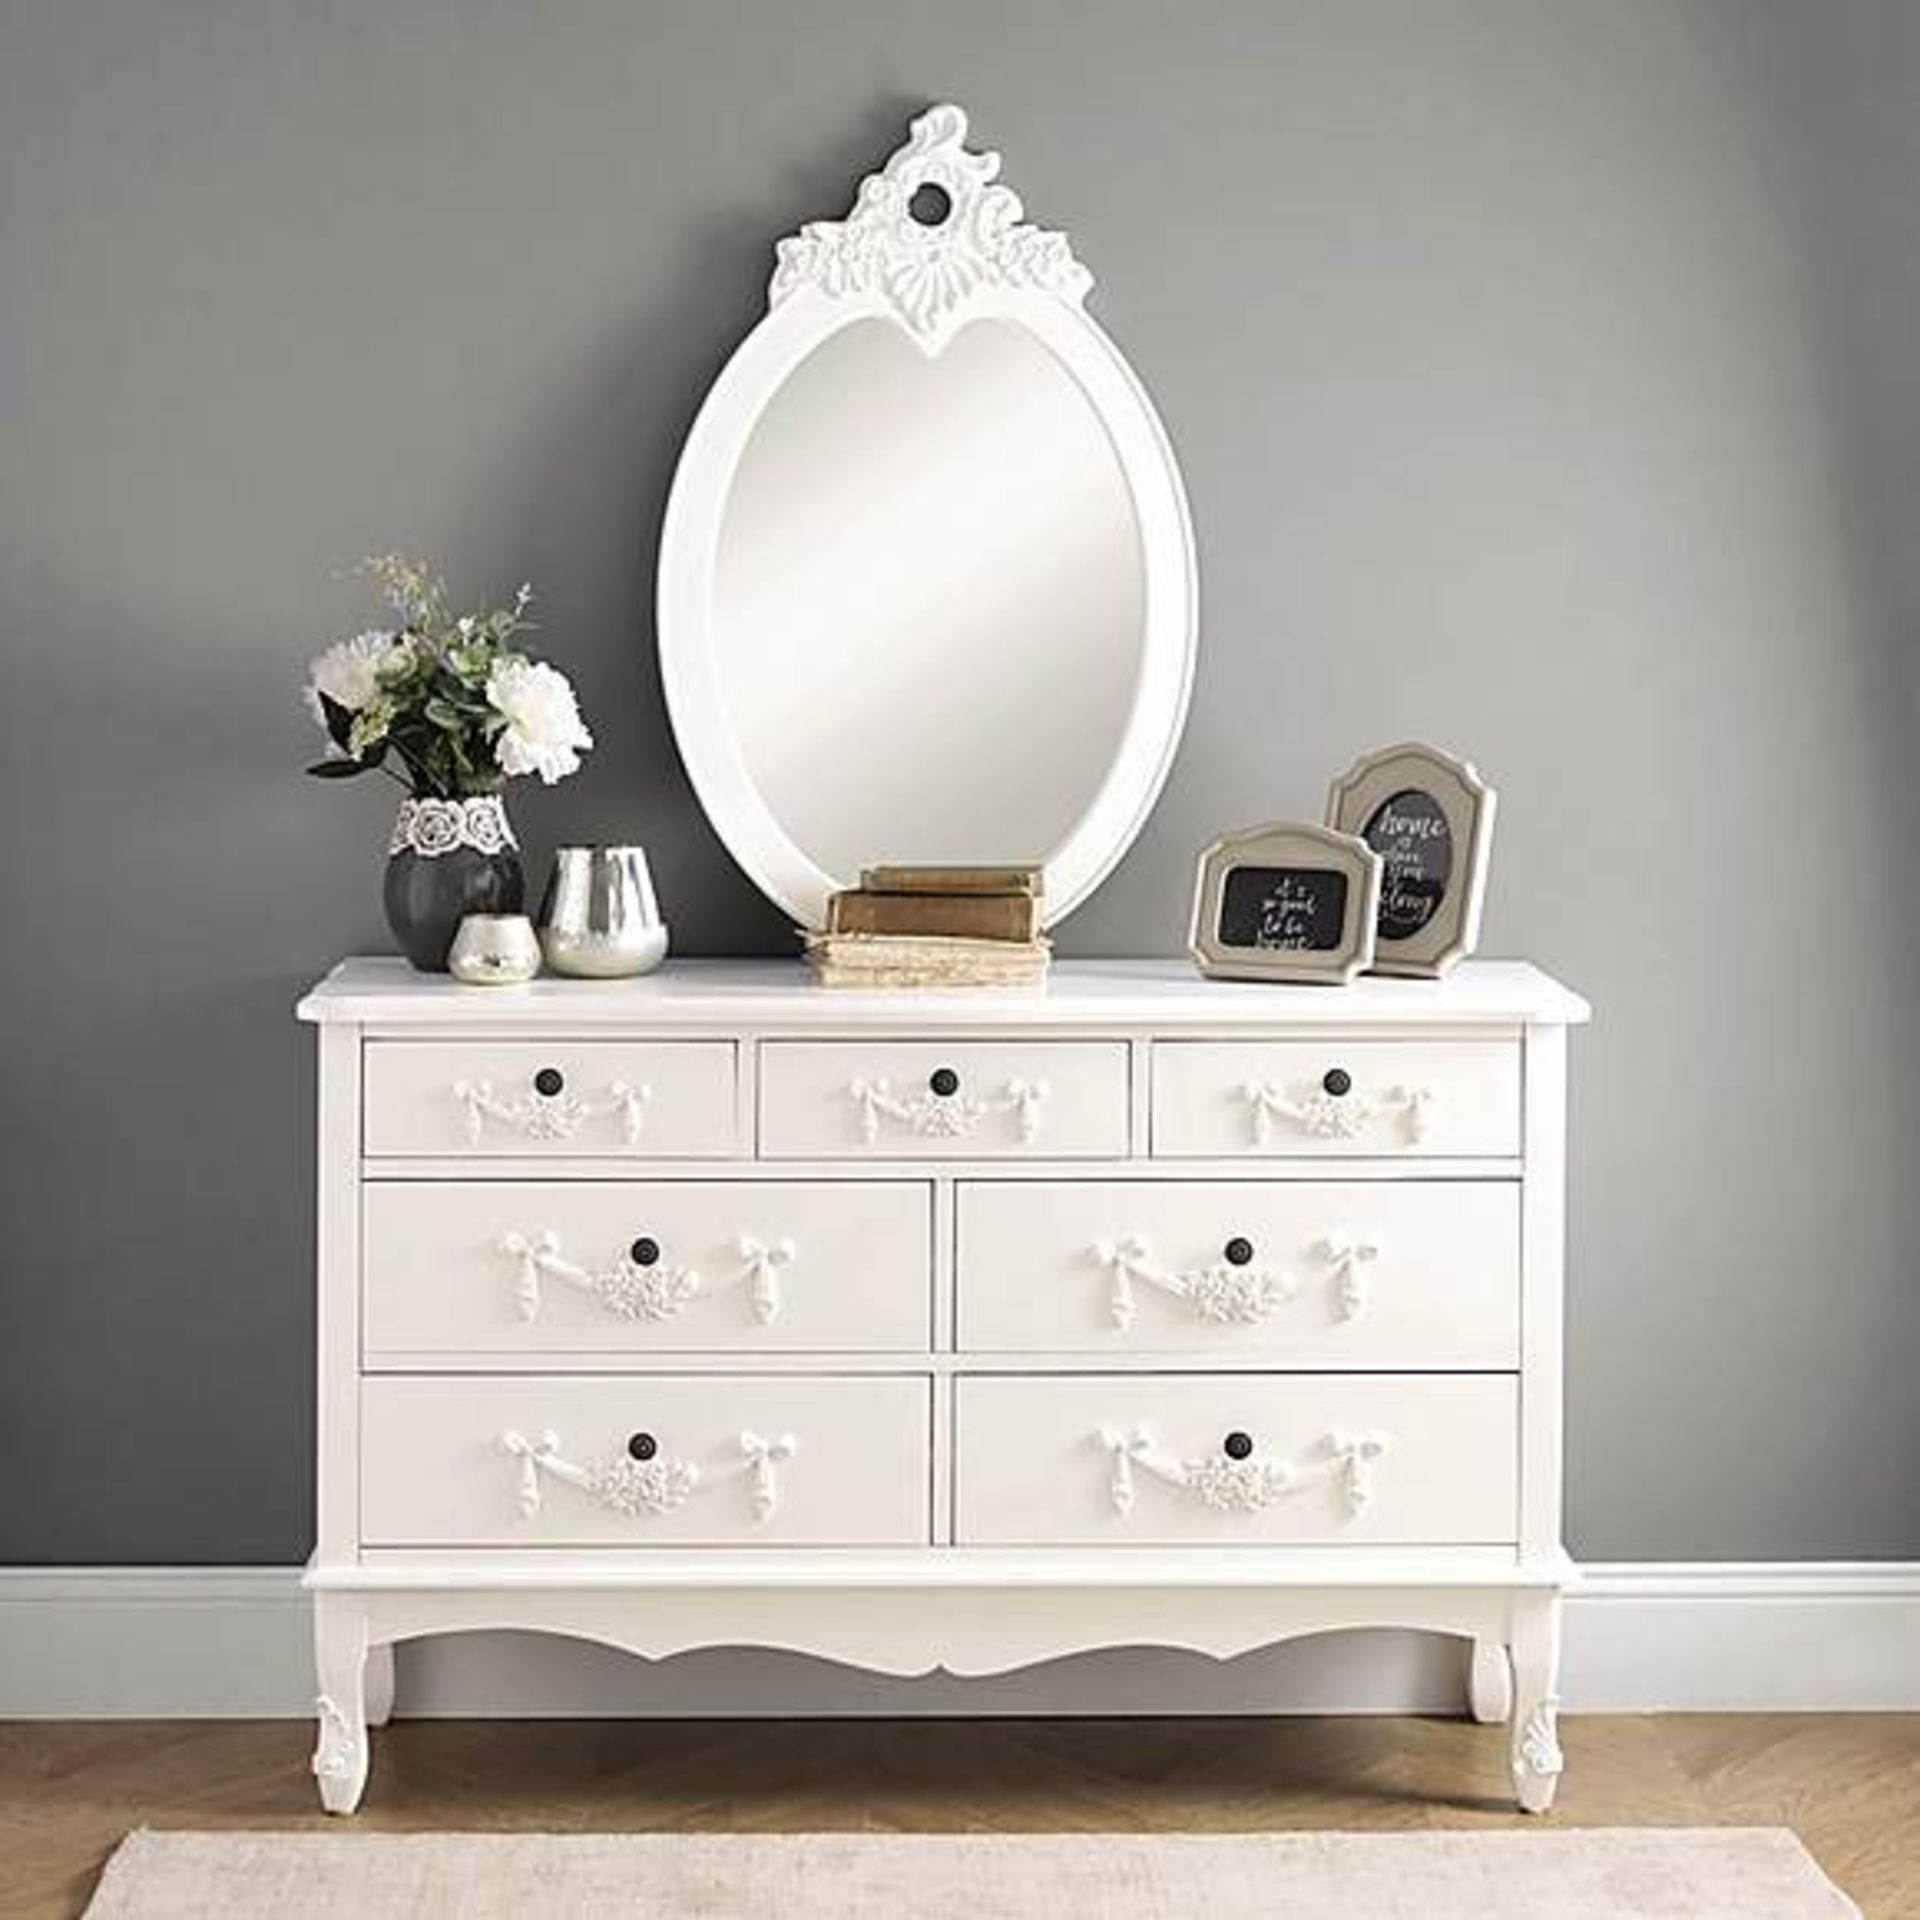 Paris 7 Drawer Chest this stunning wooden chest is the perfect way to declutter your hallway